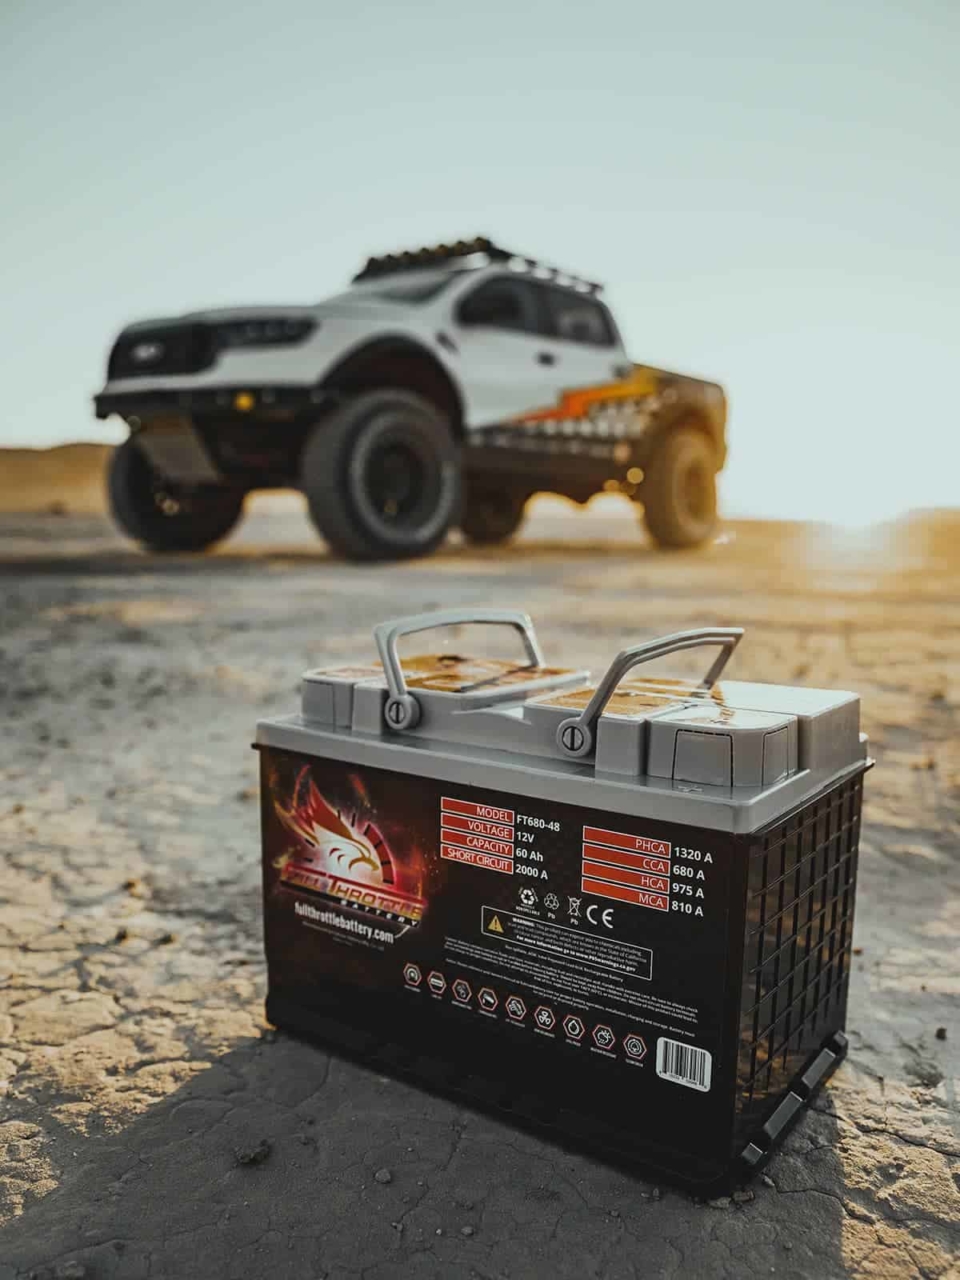 Custom retro wrapped F-150 in the desert with a Full Throttle battery in the foreground